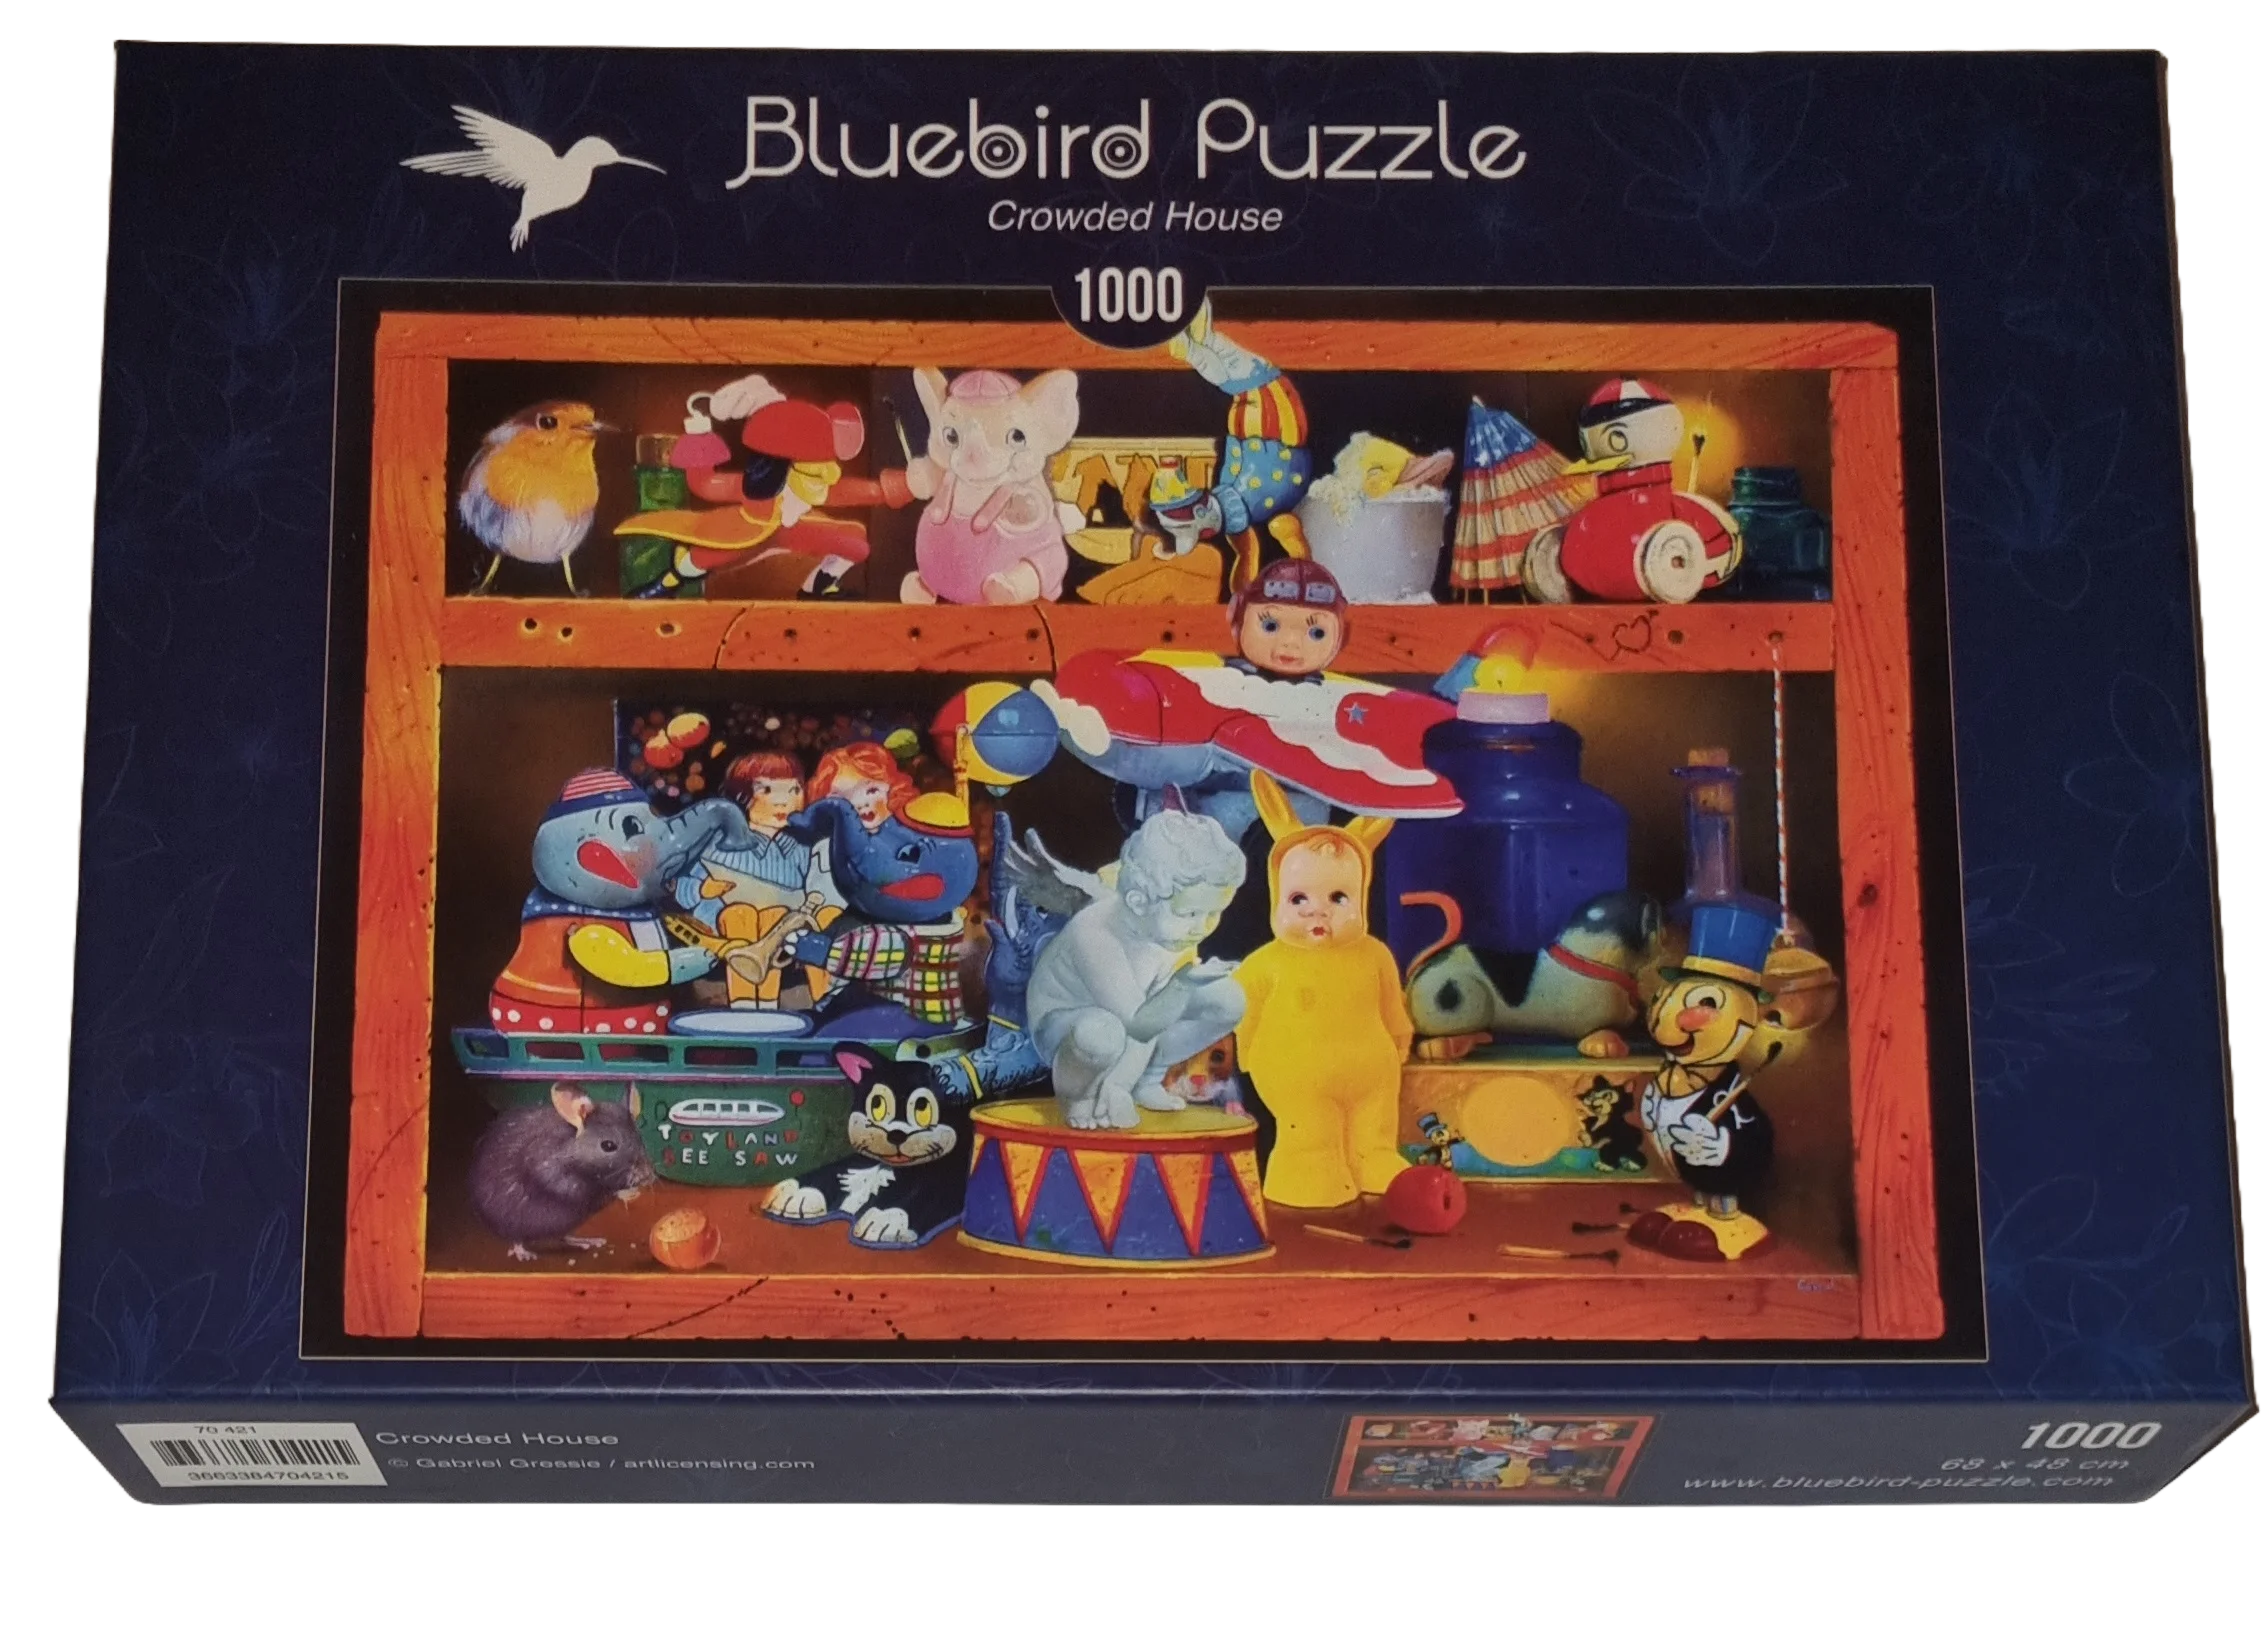 Art by Bluebird Puzzle 1000 Teile 70421 Crowed House